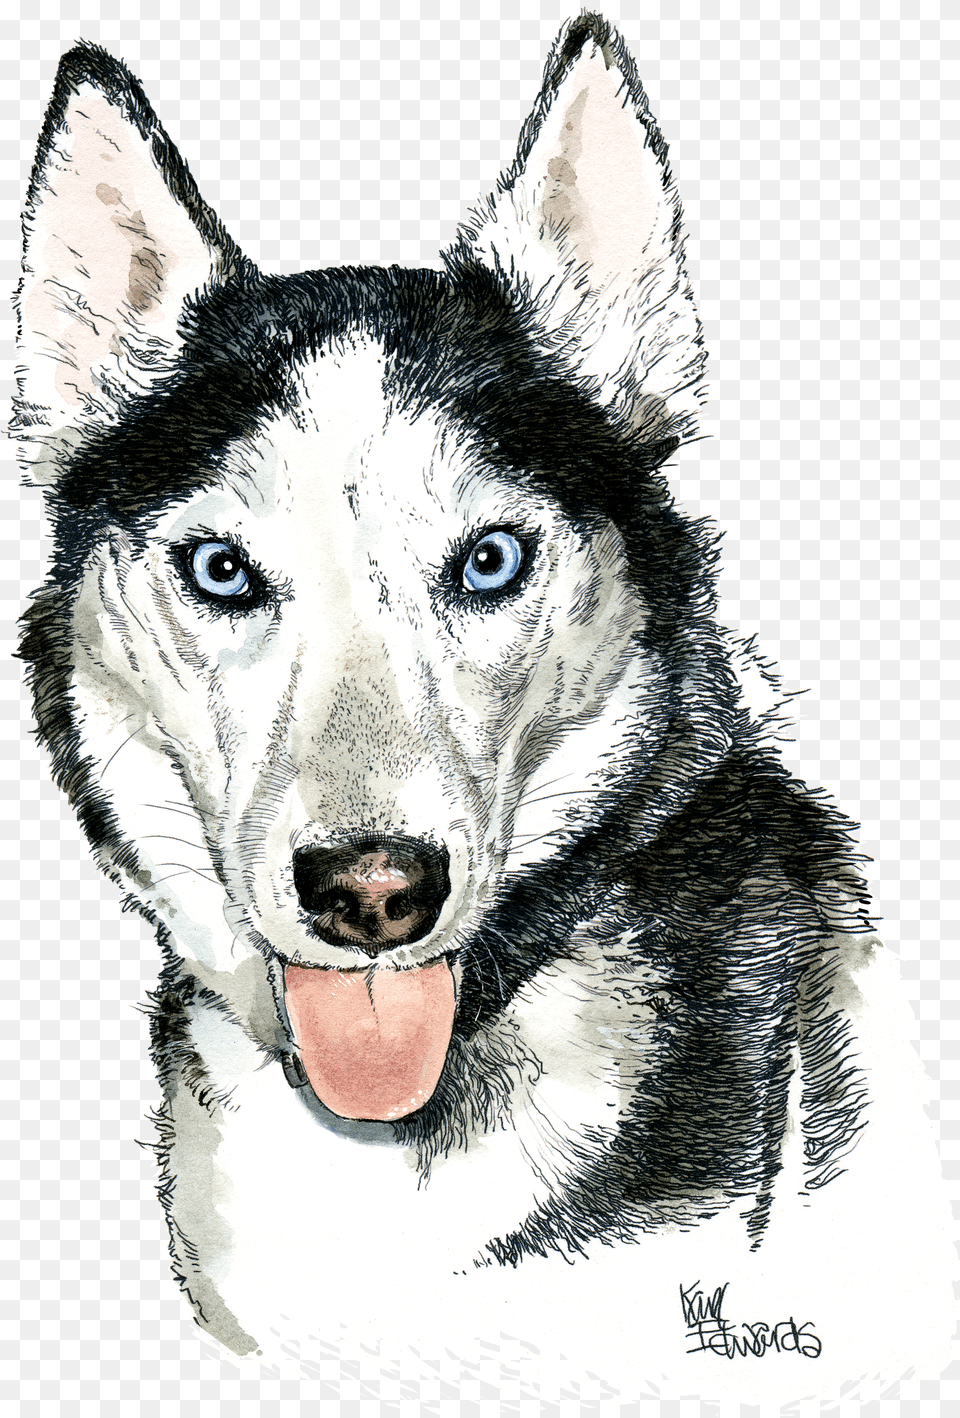 My Experience With Karl Edwards And His Brilliant Eye Sakhalin Husky Png Image